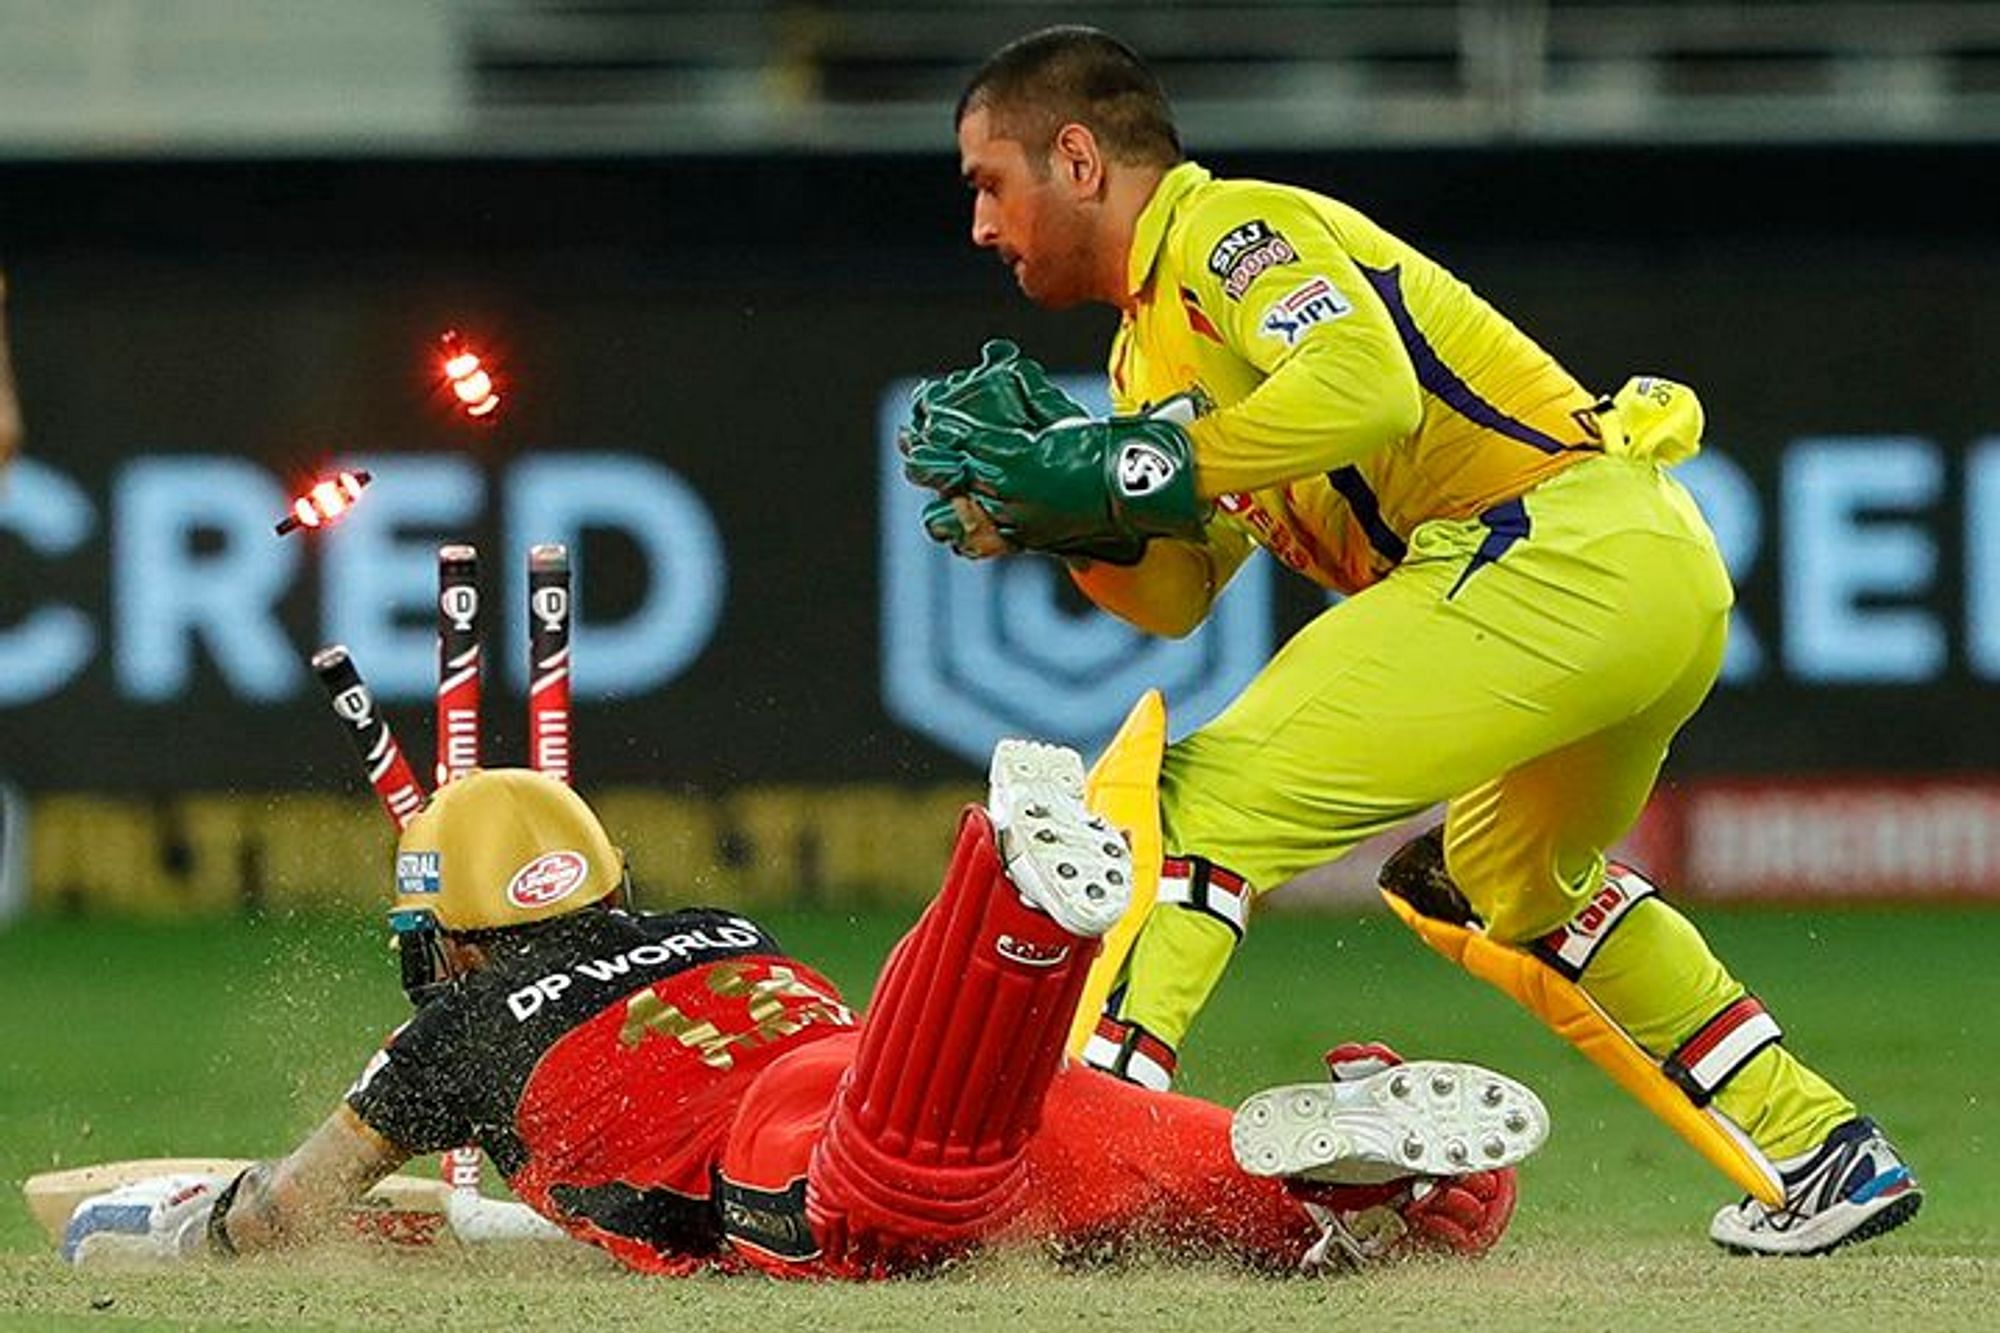 IPL 2020: Best moments from Chennai Super Kings vs Royal Challengers Bangalore